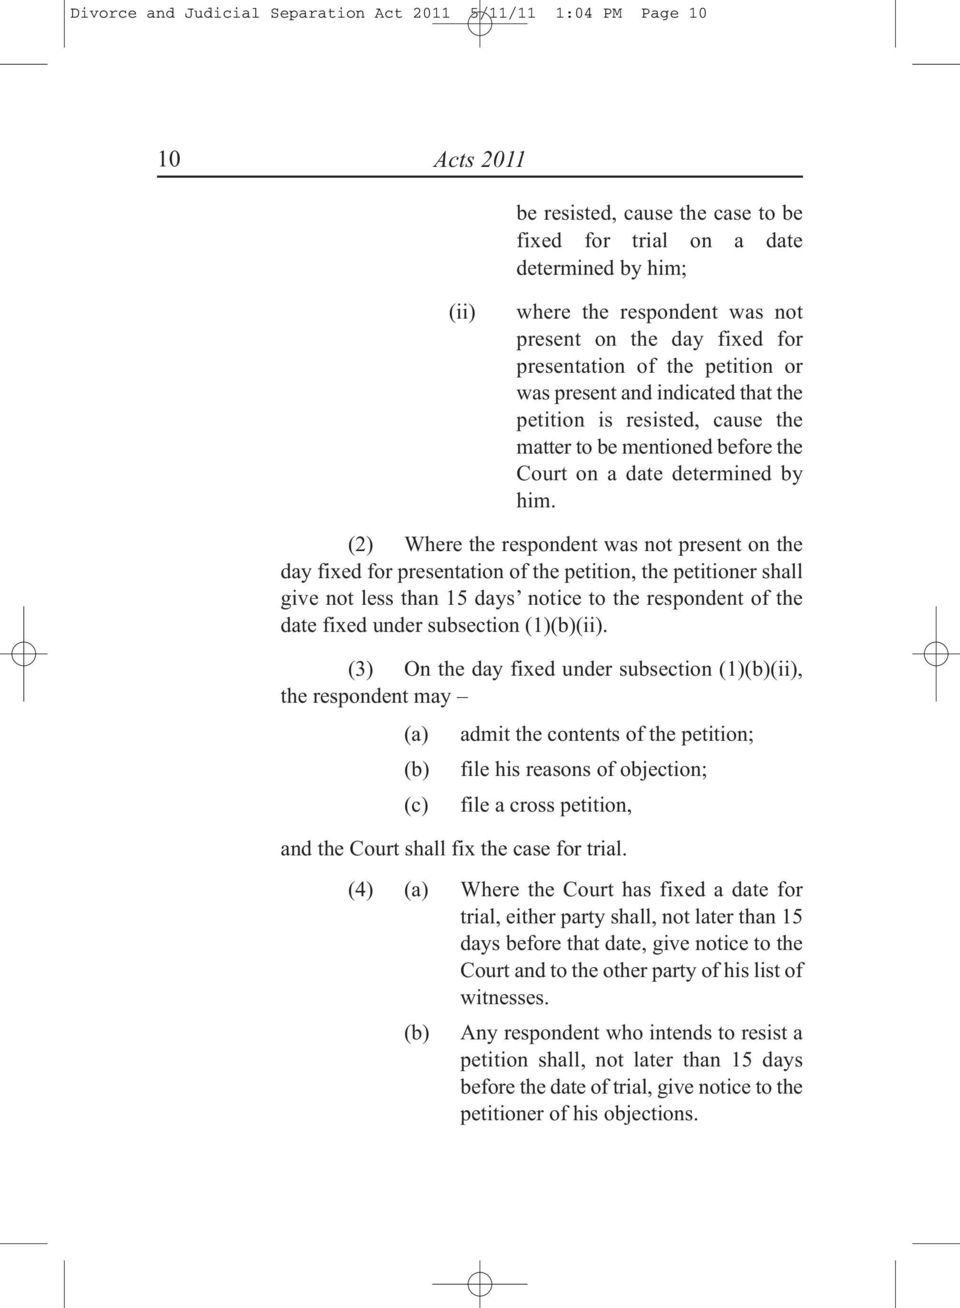 (2) Where the respondent was not present on the day fixed for presentation of the petition, the petitioner shall give not less than 15 days notice to the respondent of the date fixed under subsection